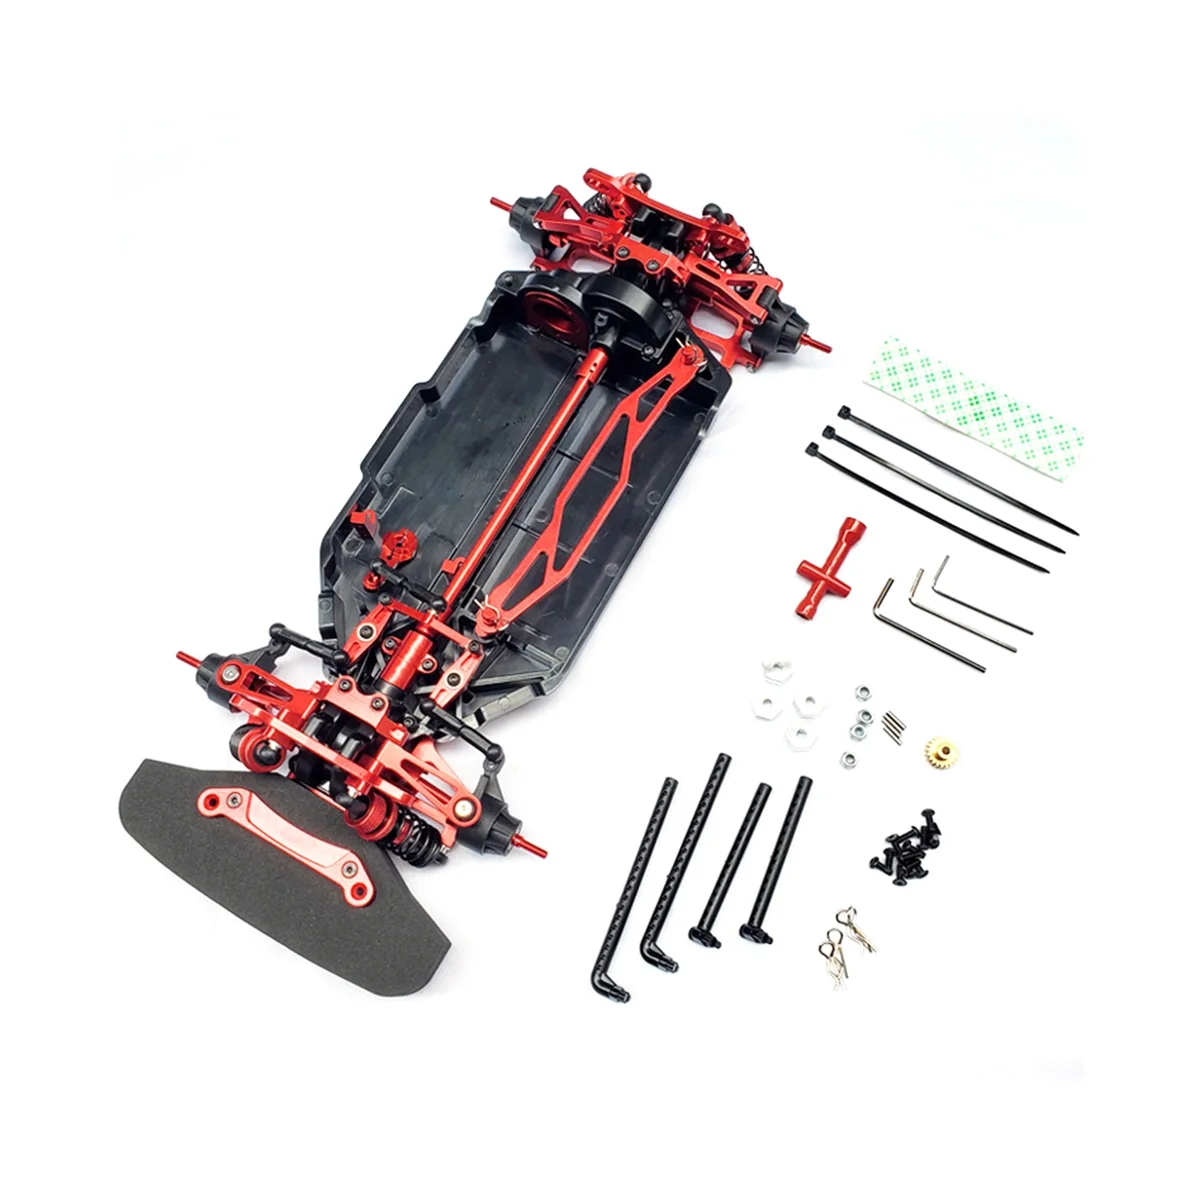 

Metal TT02 4WD 1/10 Touring Car On-Road Drift RC Car Frame Kit Ch is